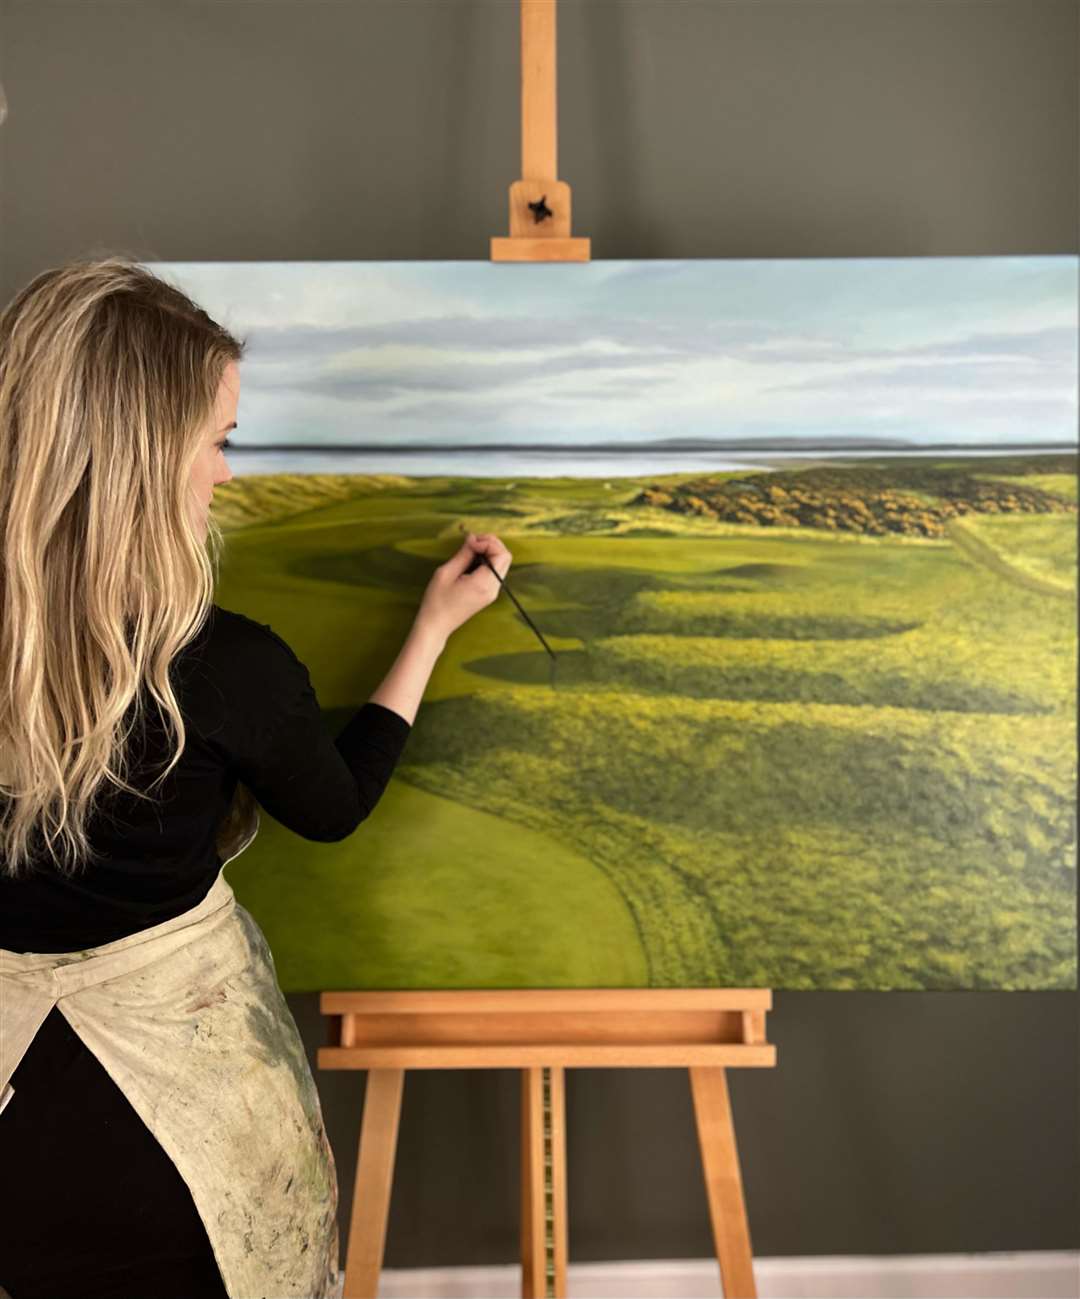 Aimee Smith’s first Royal Dornoch landscape features “Foxy” – the 14th hole on the Championship Course.